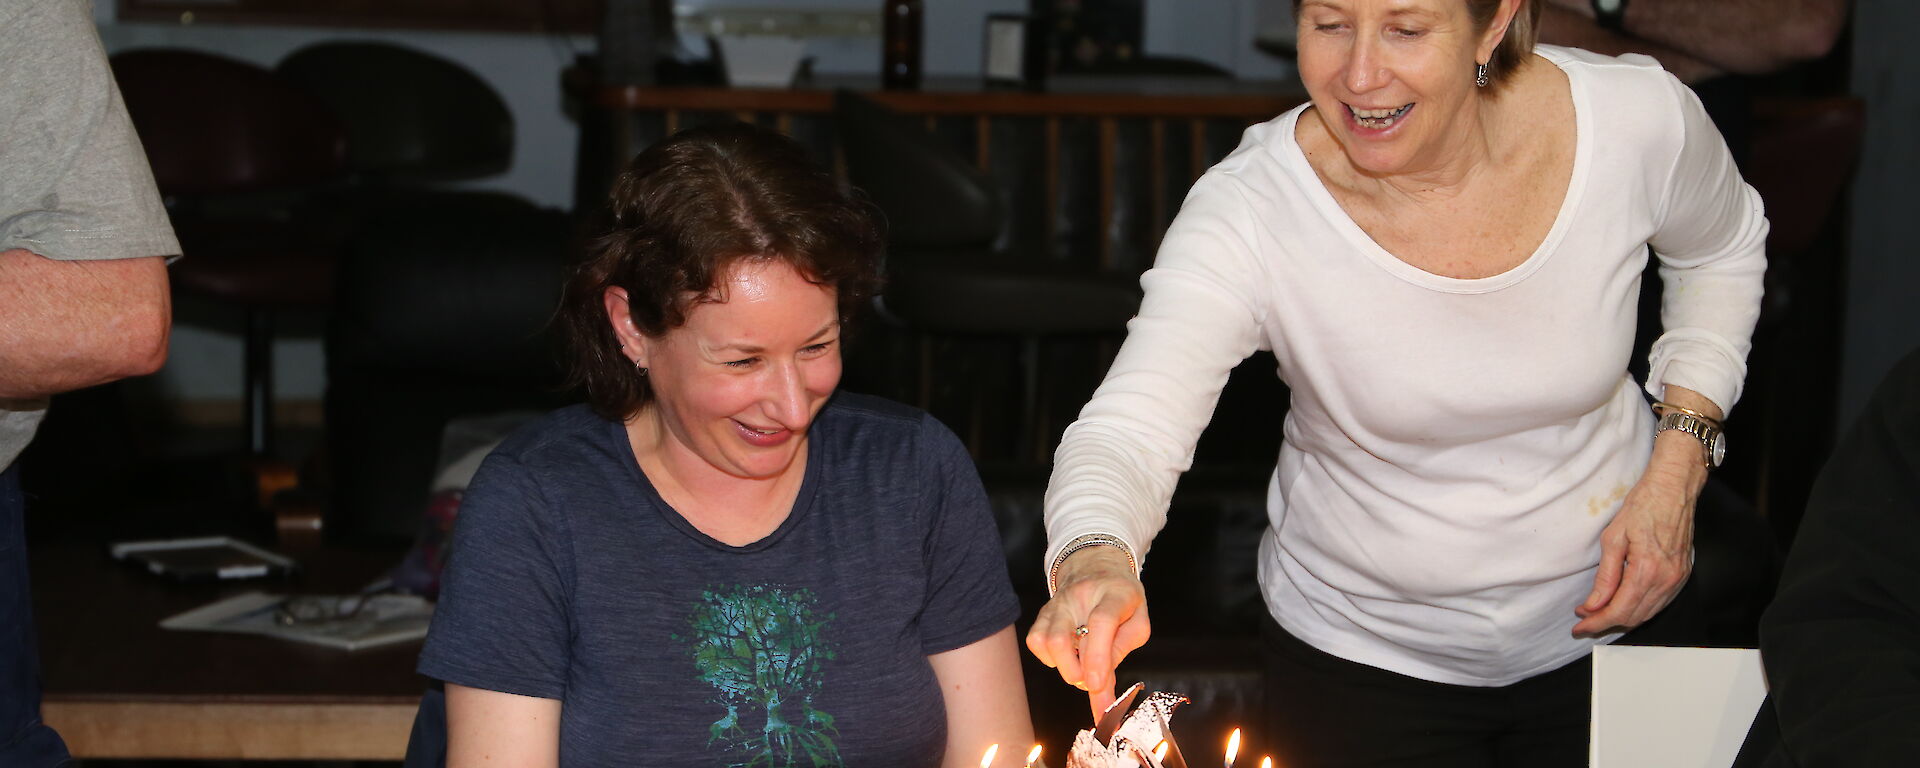 Annette Fear lights the candles on a birthday cake while the recipient Vicki Heinrich looks on